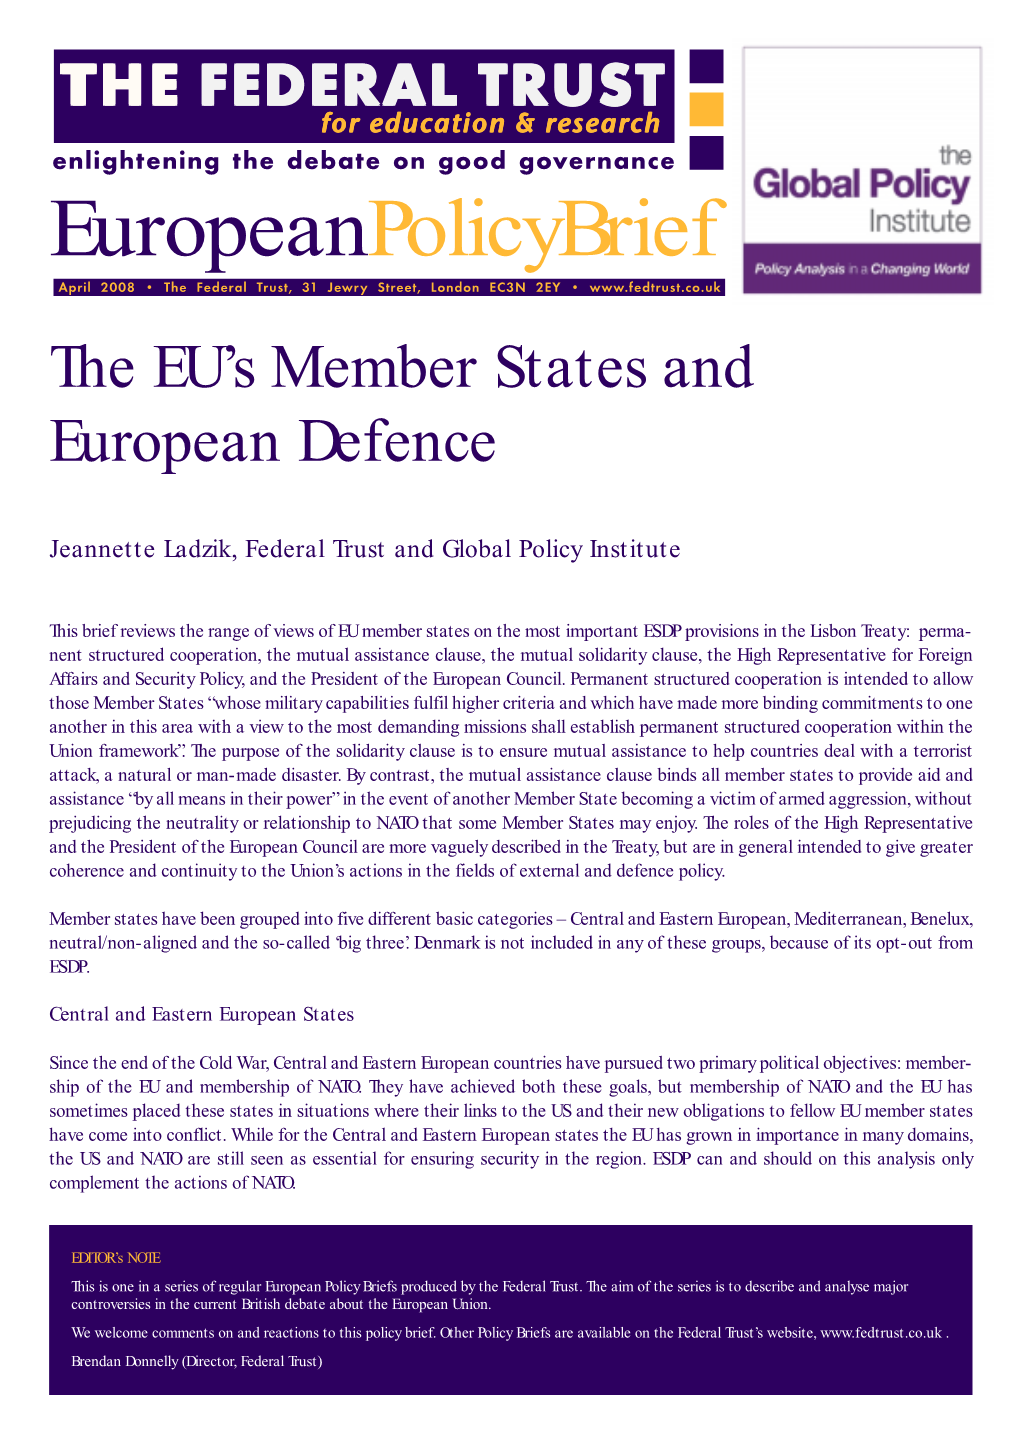 The EU's Member States and European Defence